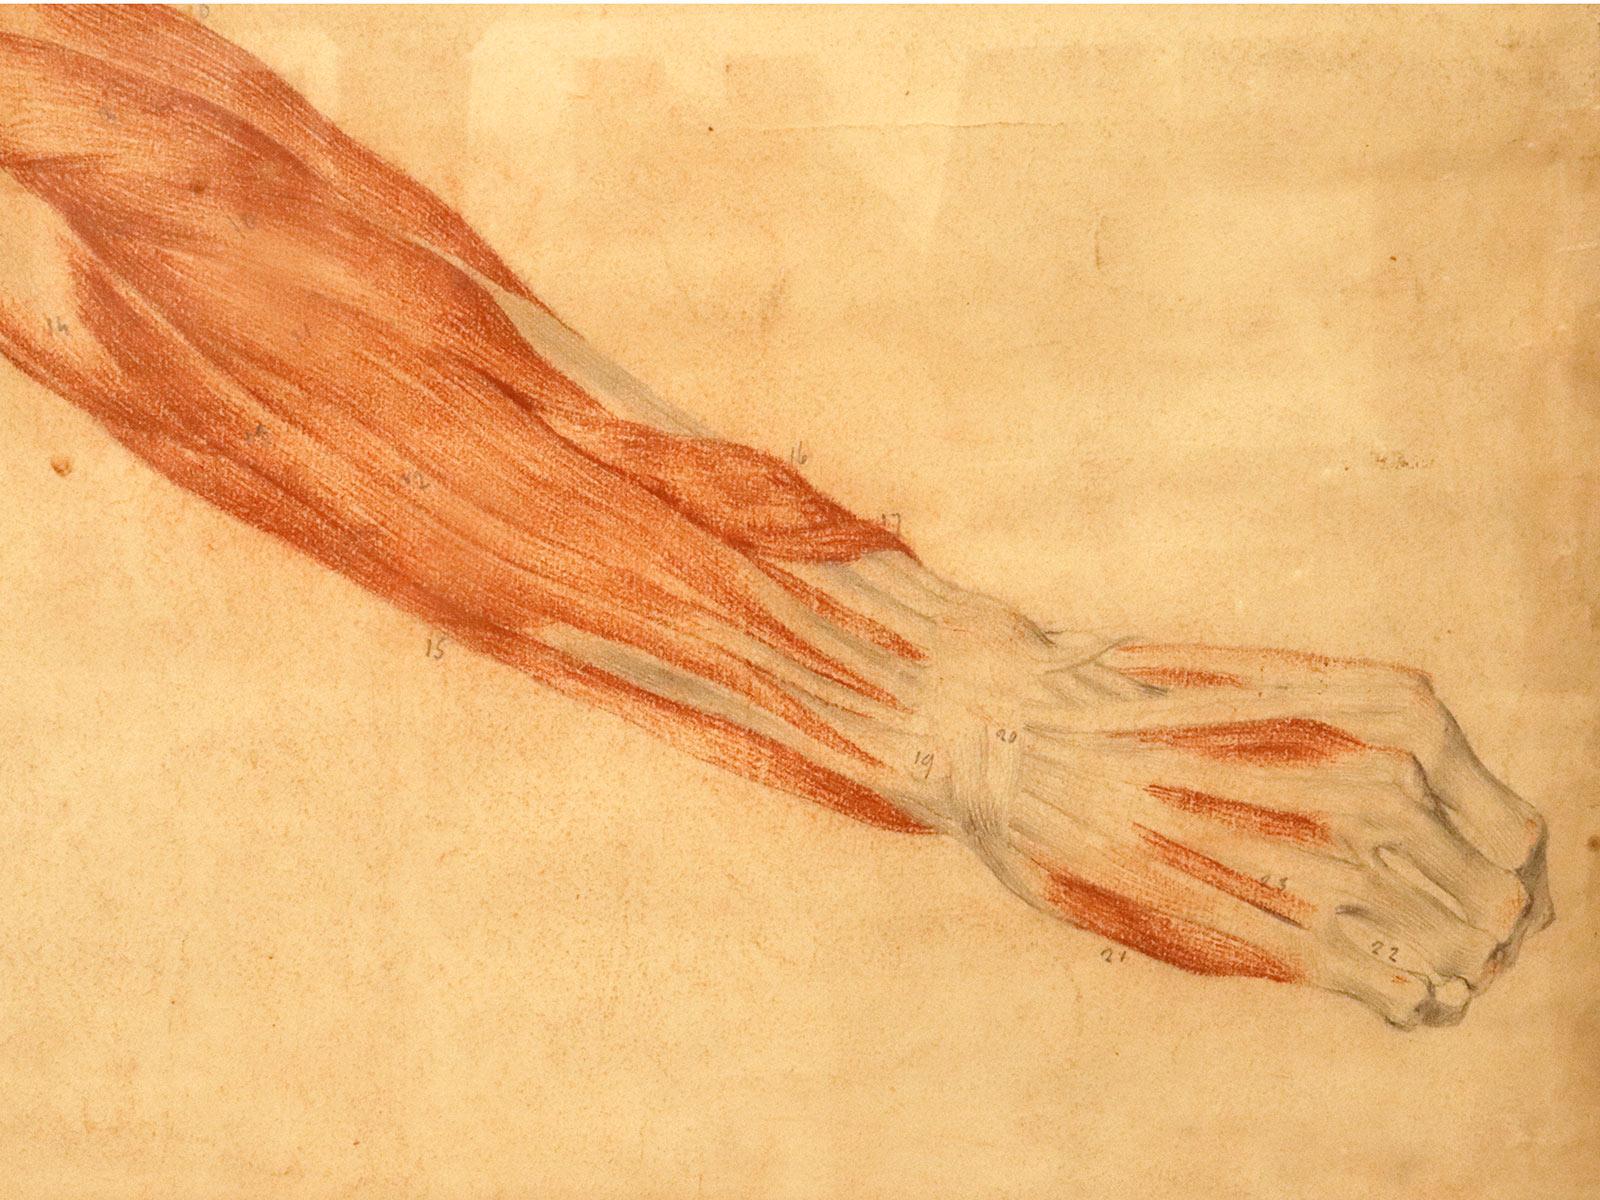 Anatomical drawing of an upper limb, made in pencil and sanguine, Italy 1889. For Sale 2